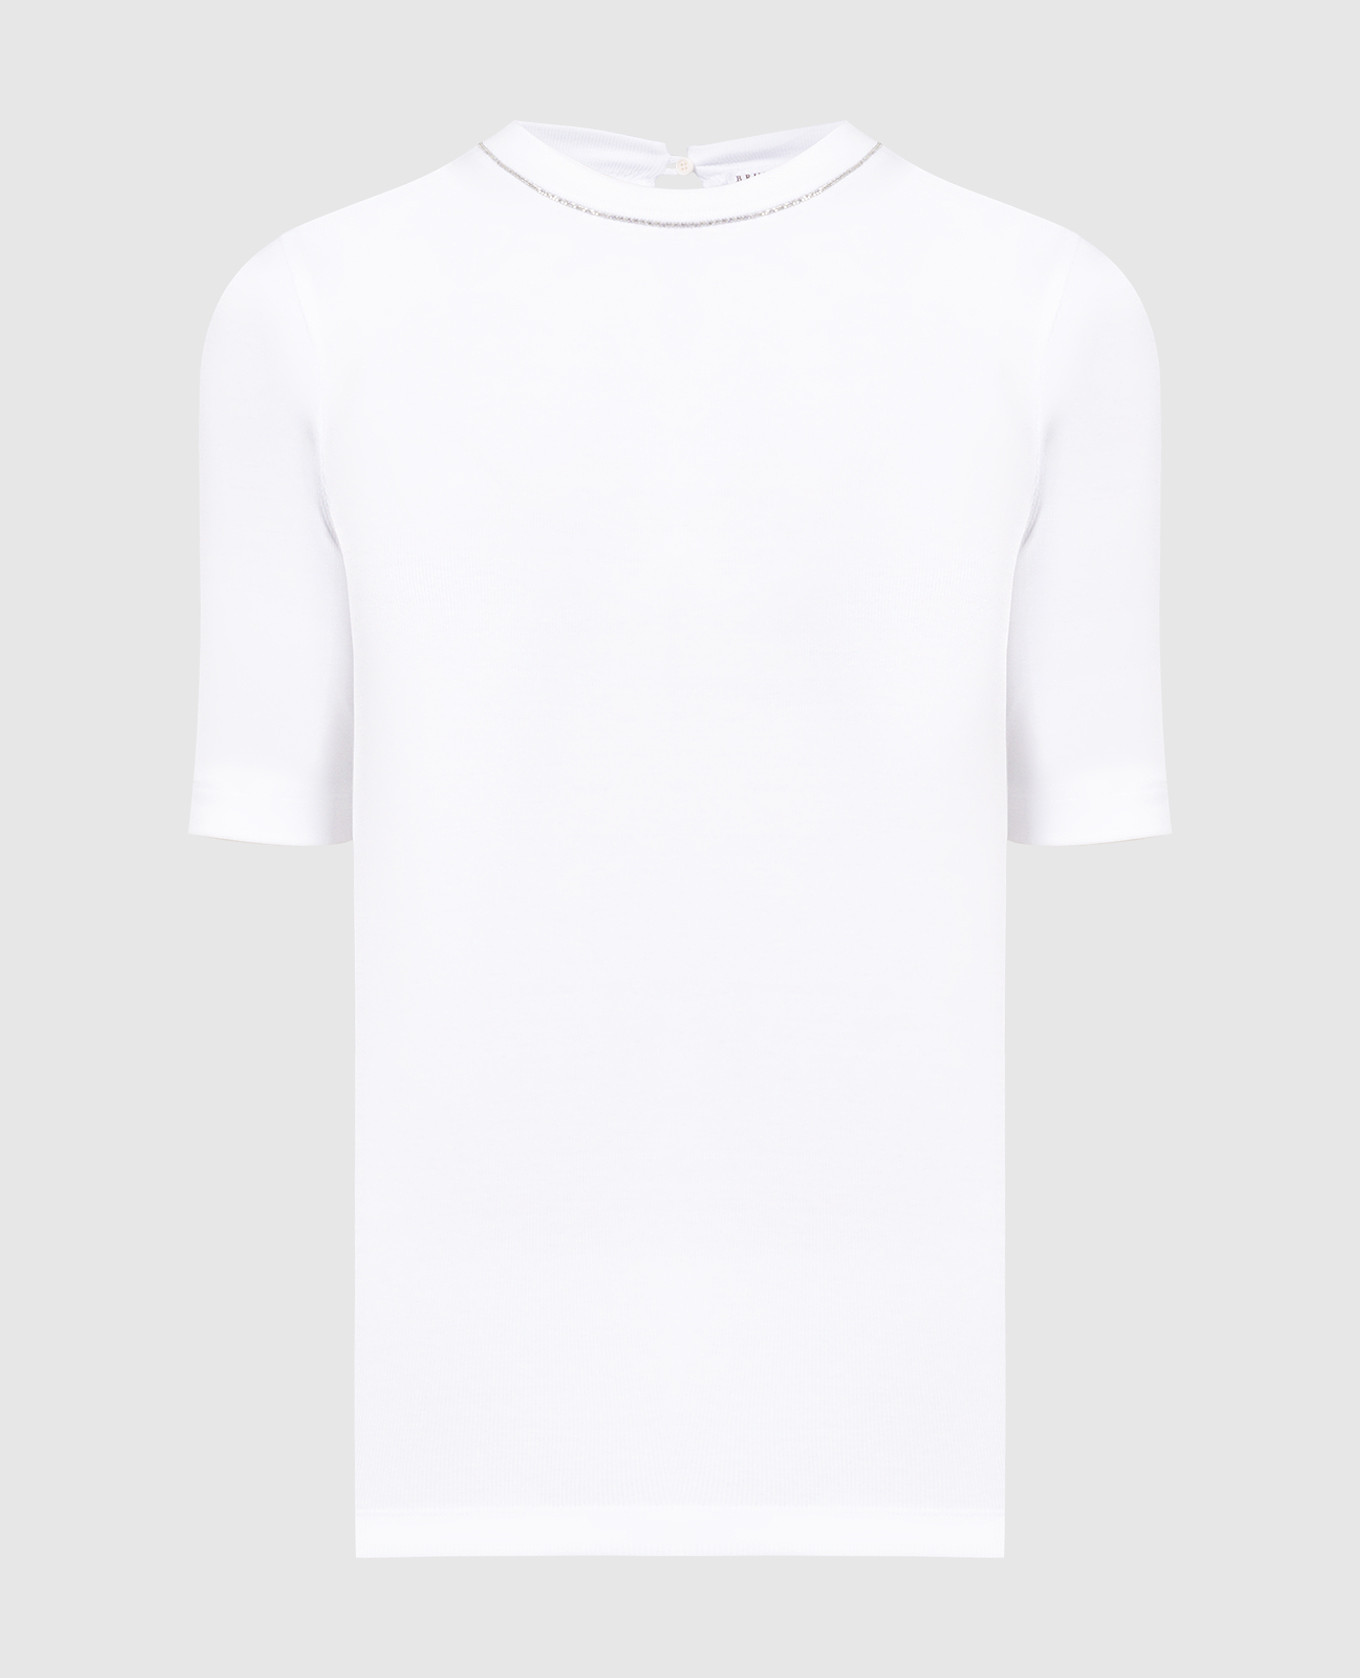 White t-shirt with a scar with a monil chain